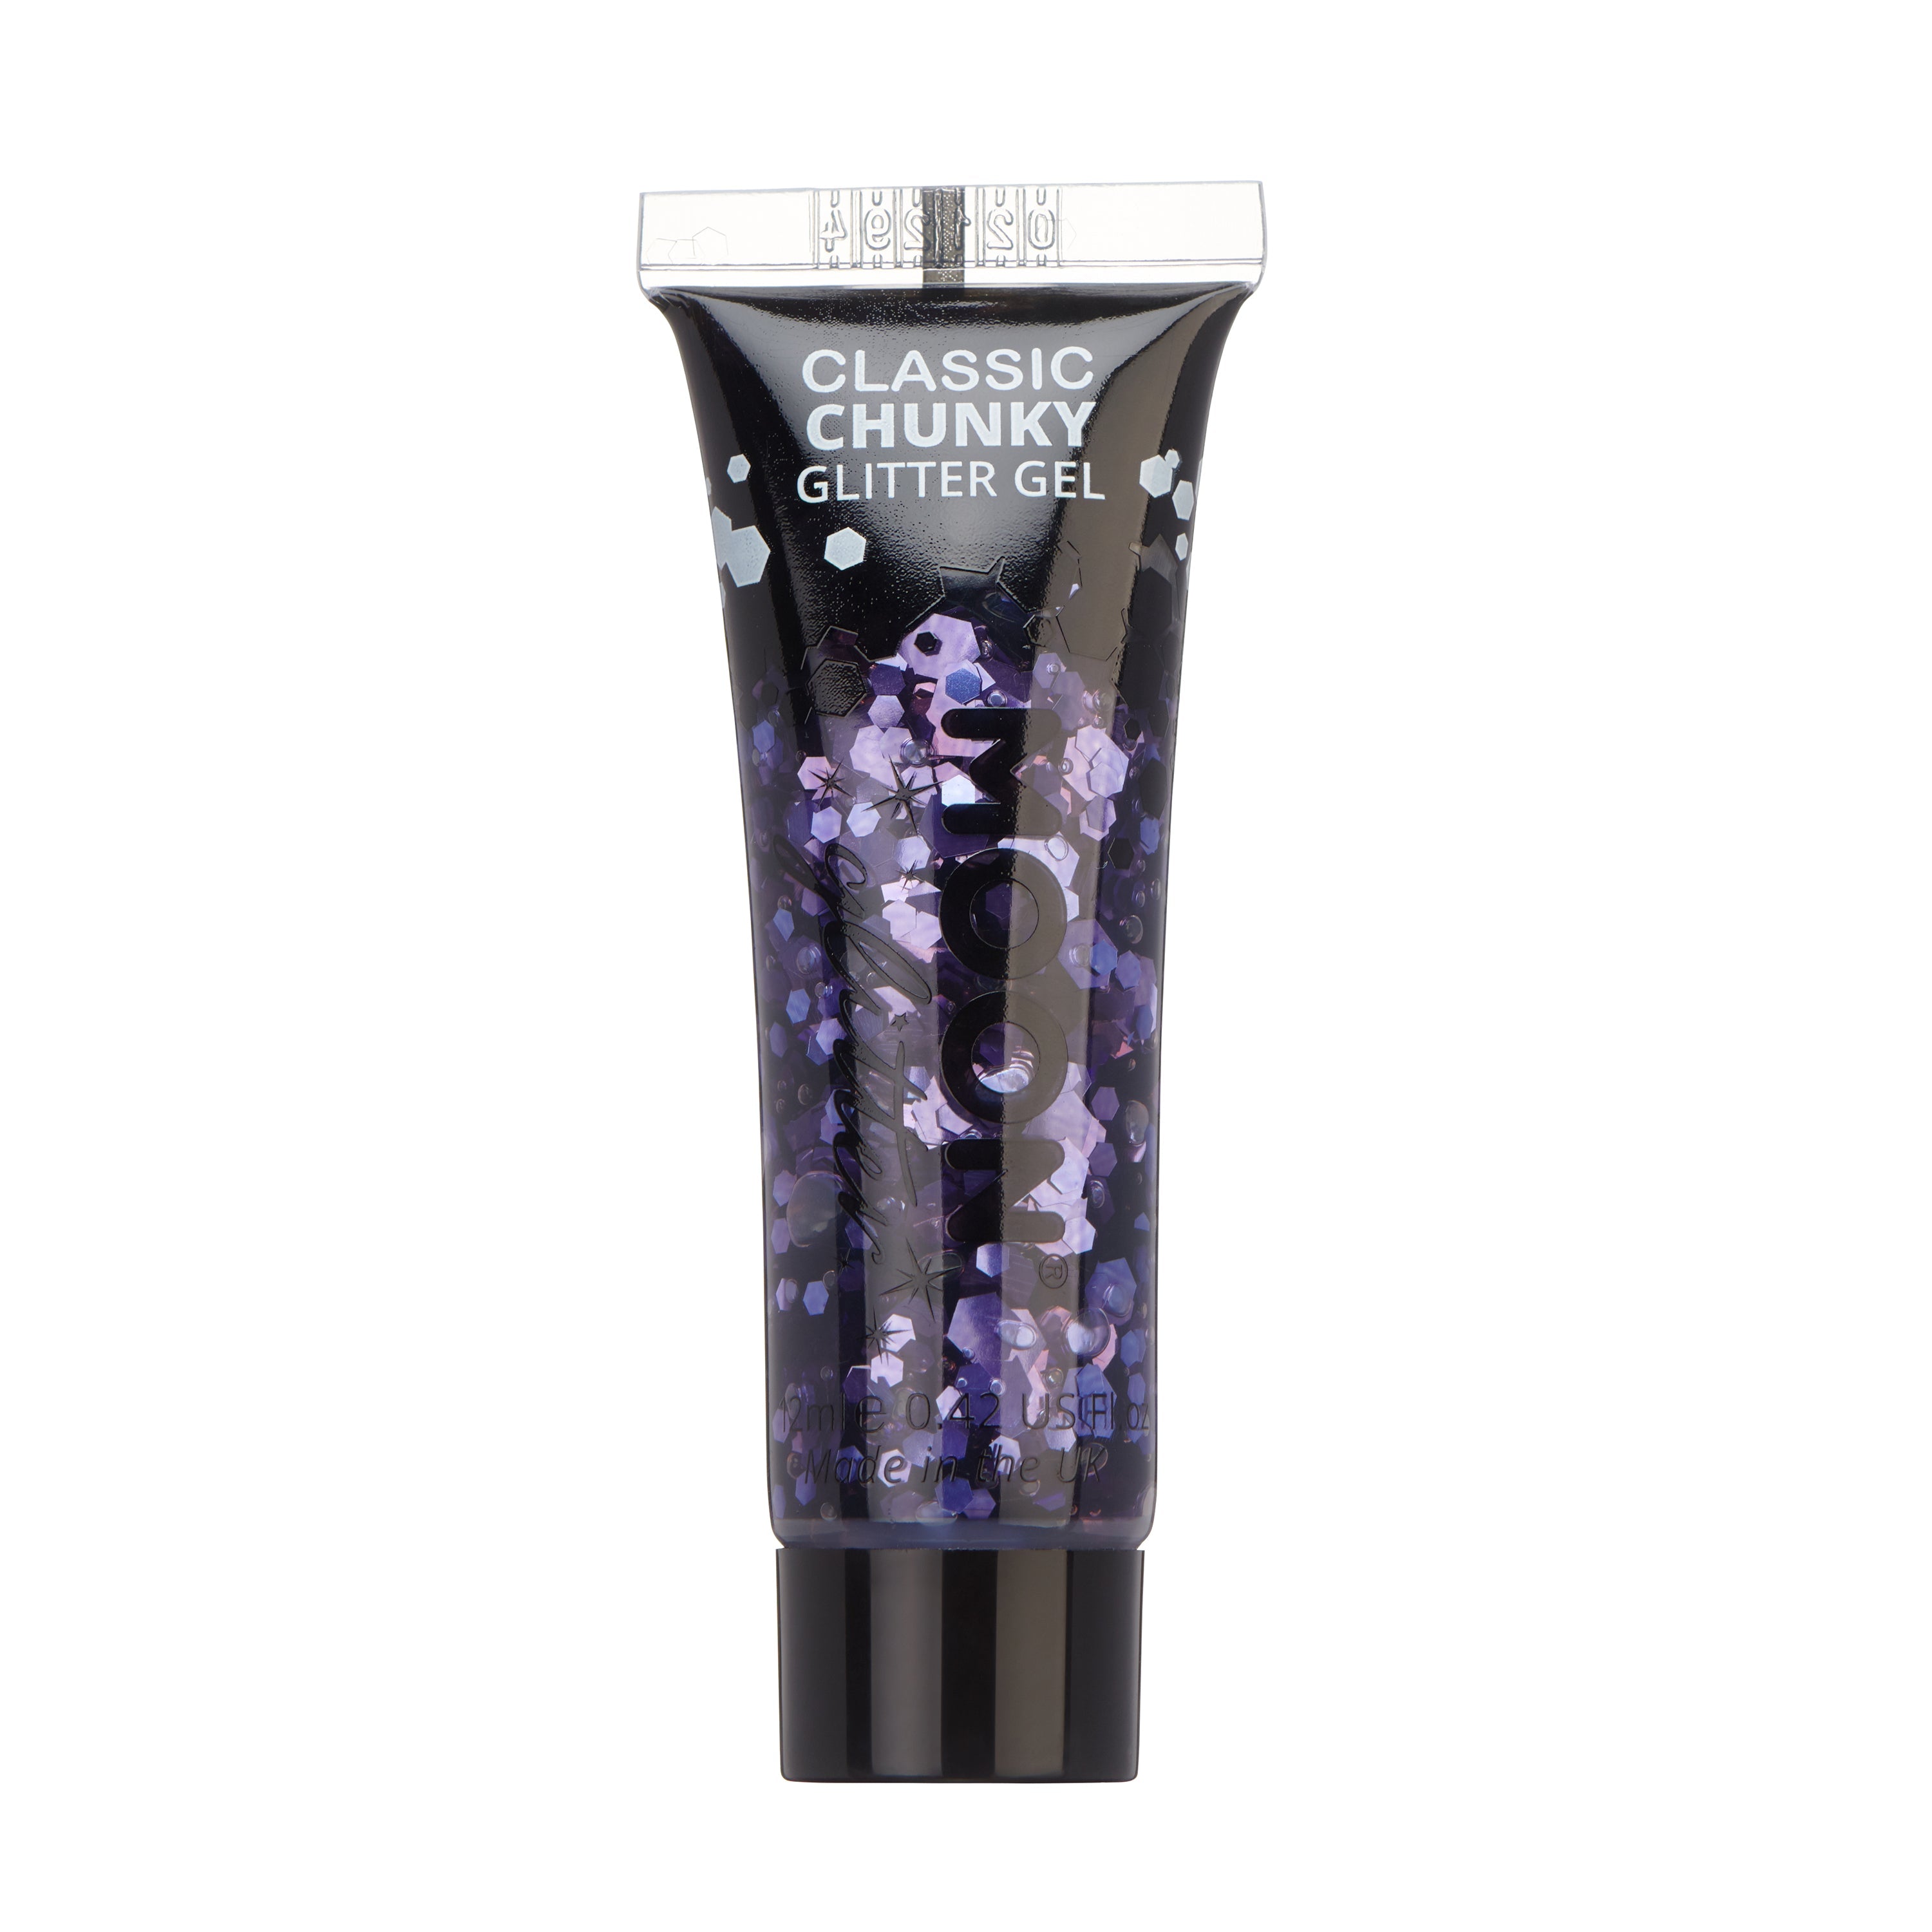 Lavender - Classic Chunky Face & Body Glitter Gel, 12mL. Cosmetically certified, FDA & Health Canada compliant, cruelty free and vegan.